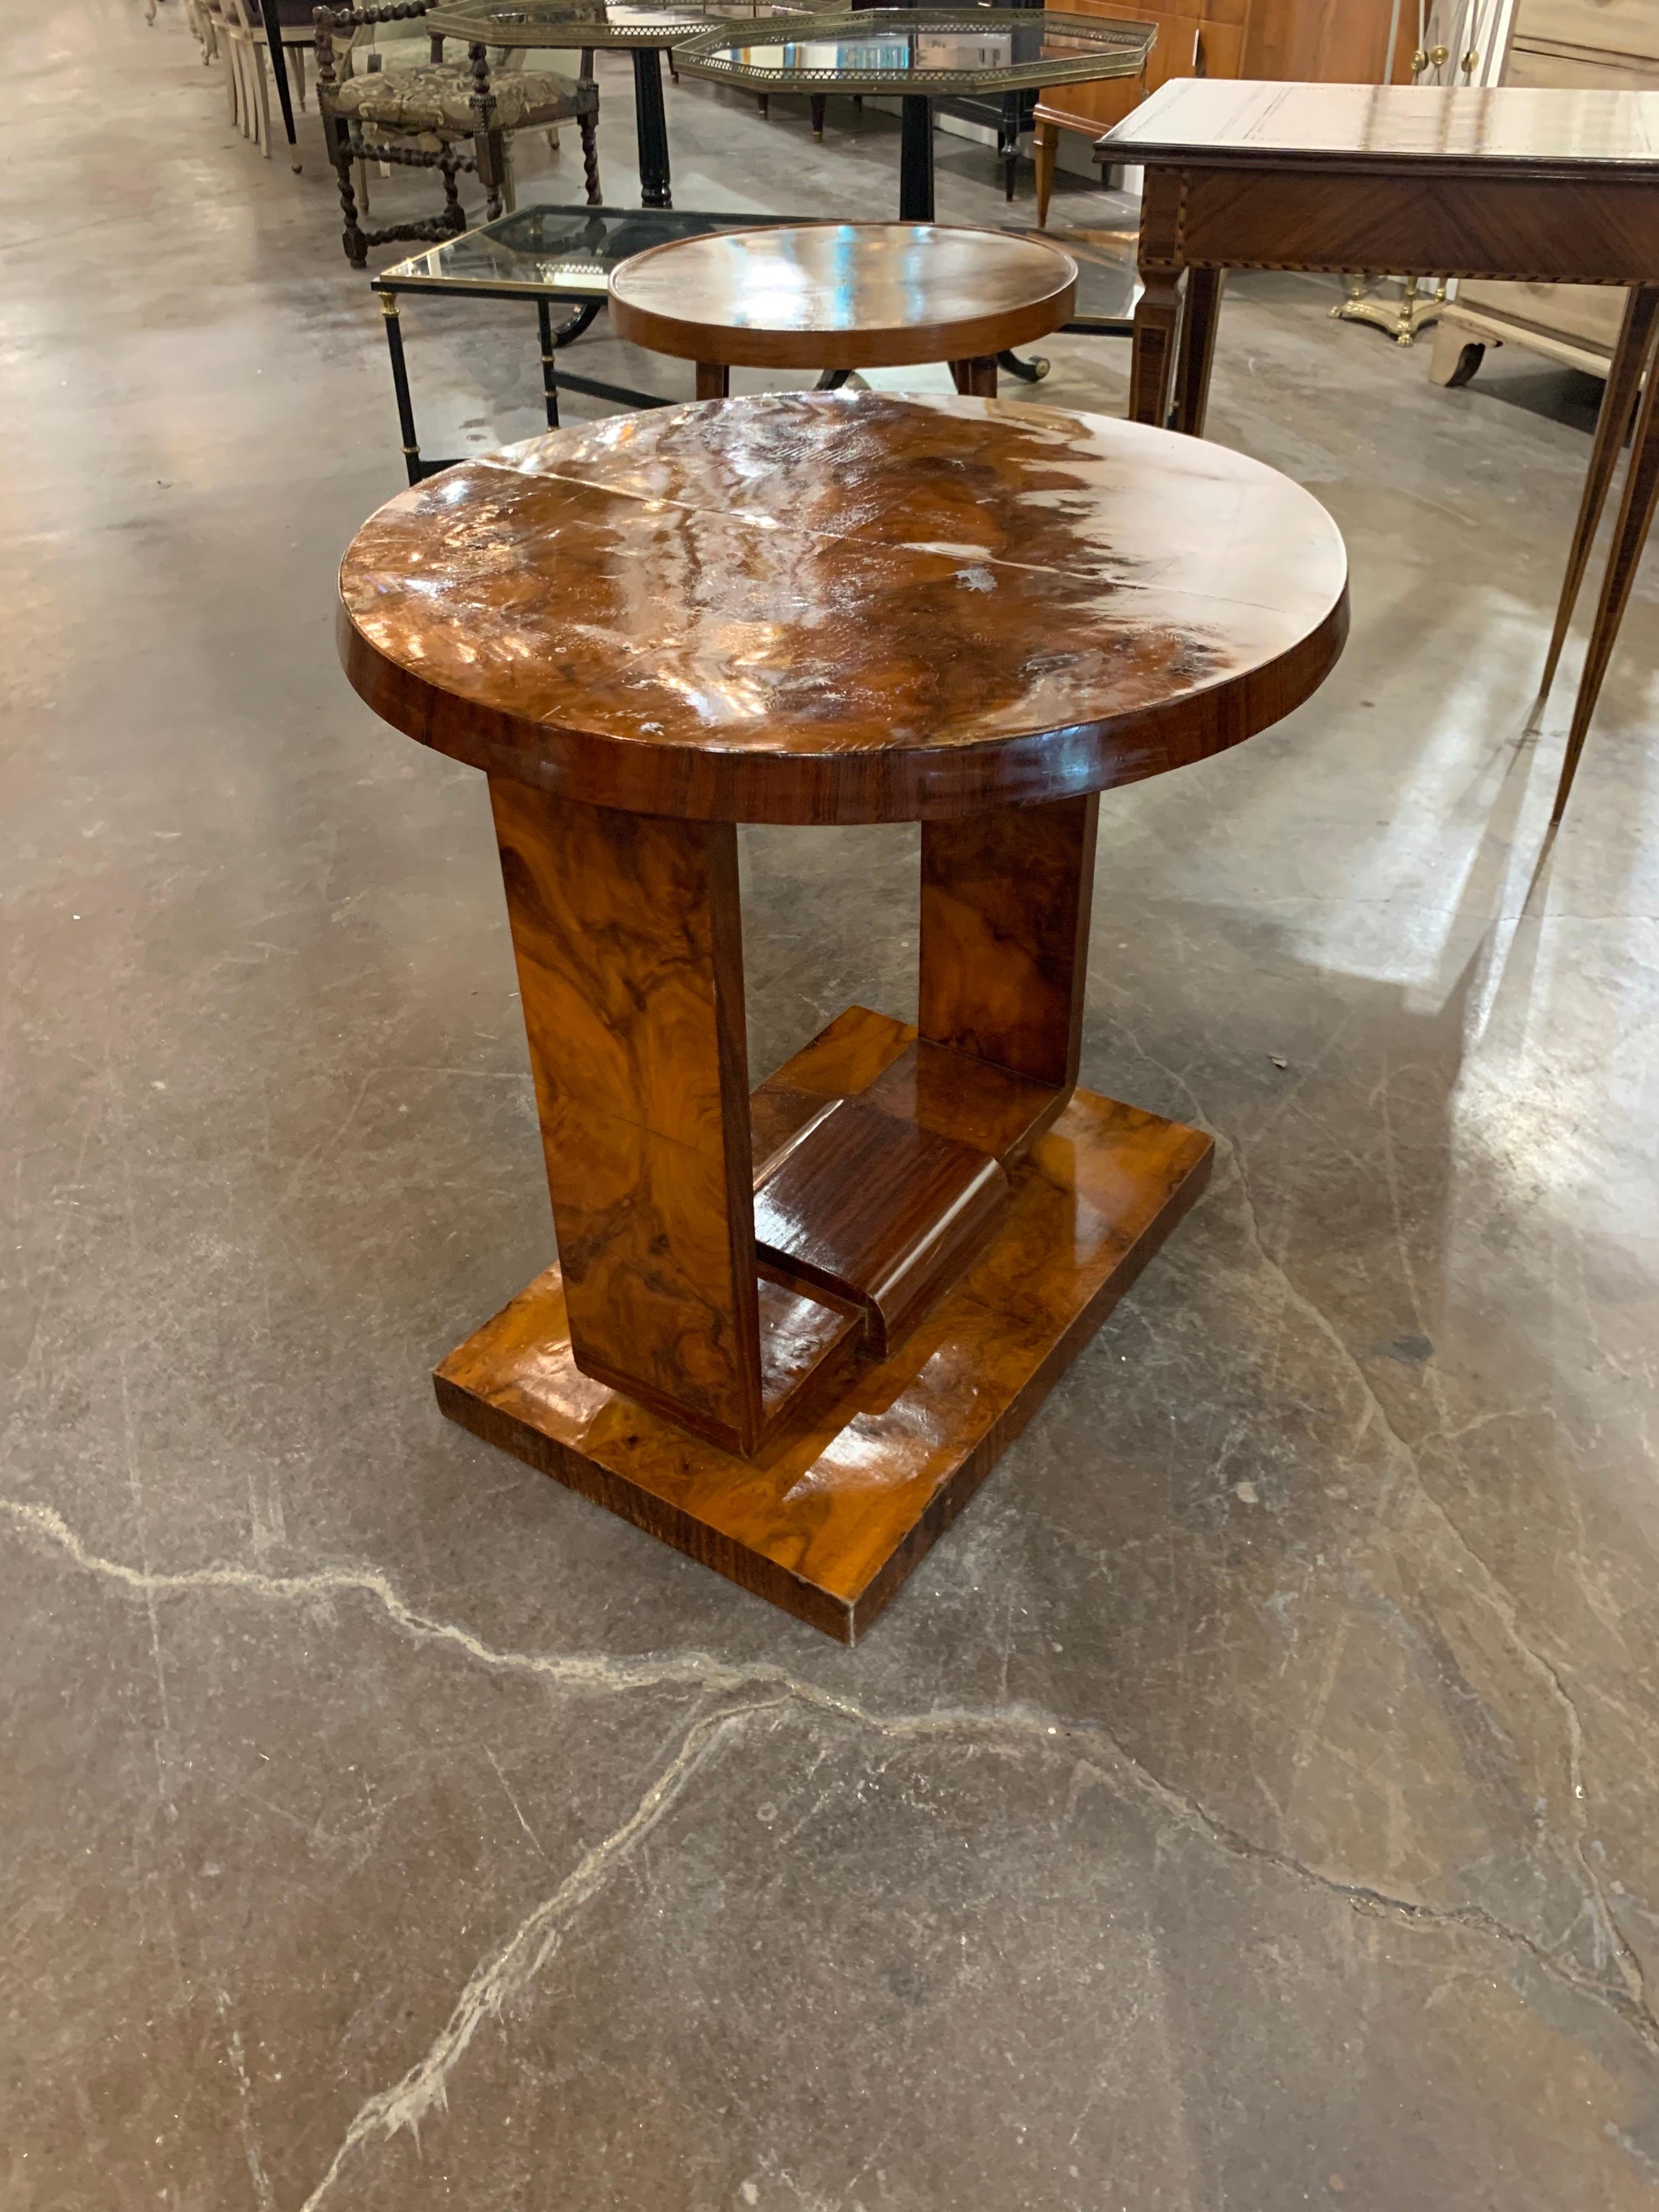 Fabulous French Art Deco exotic veneer side table. A beautiful decorative piece with an exceptional polished finish!